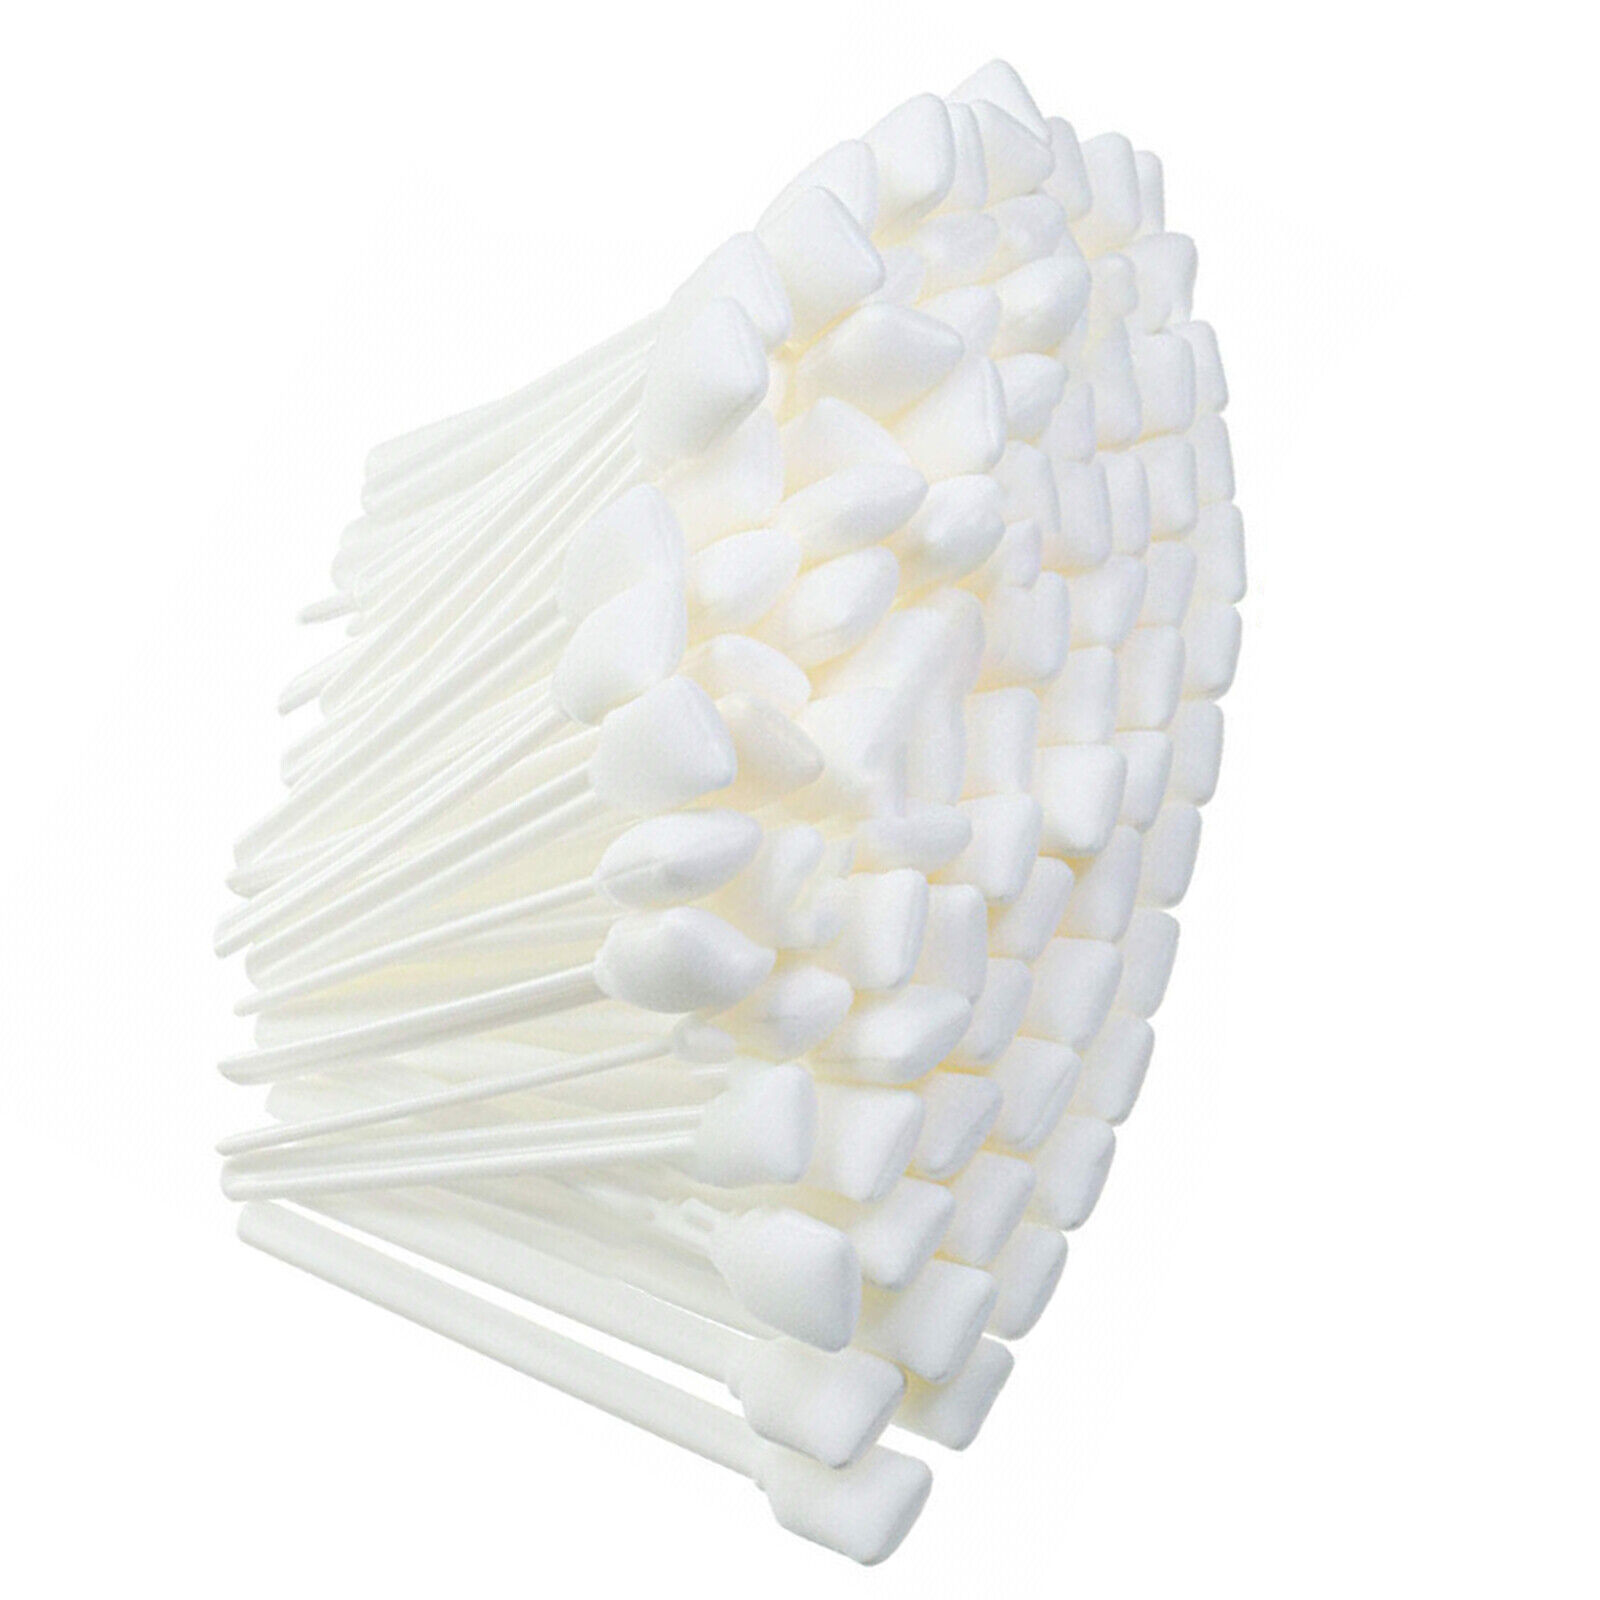 50pcs Cleaning Swabs Foam Tipped Stick For Roland Mimaki Mutoh Epson Printer/